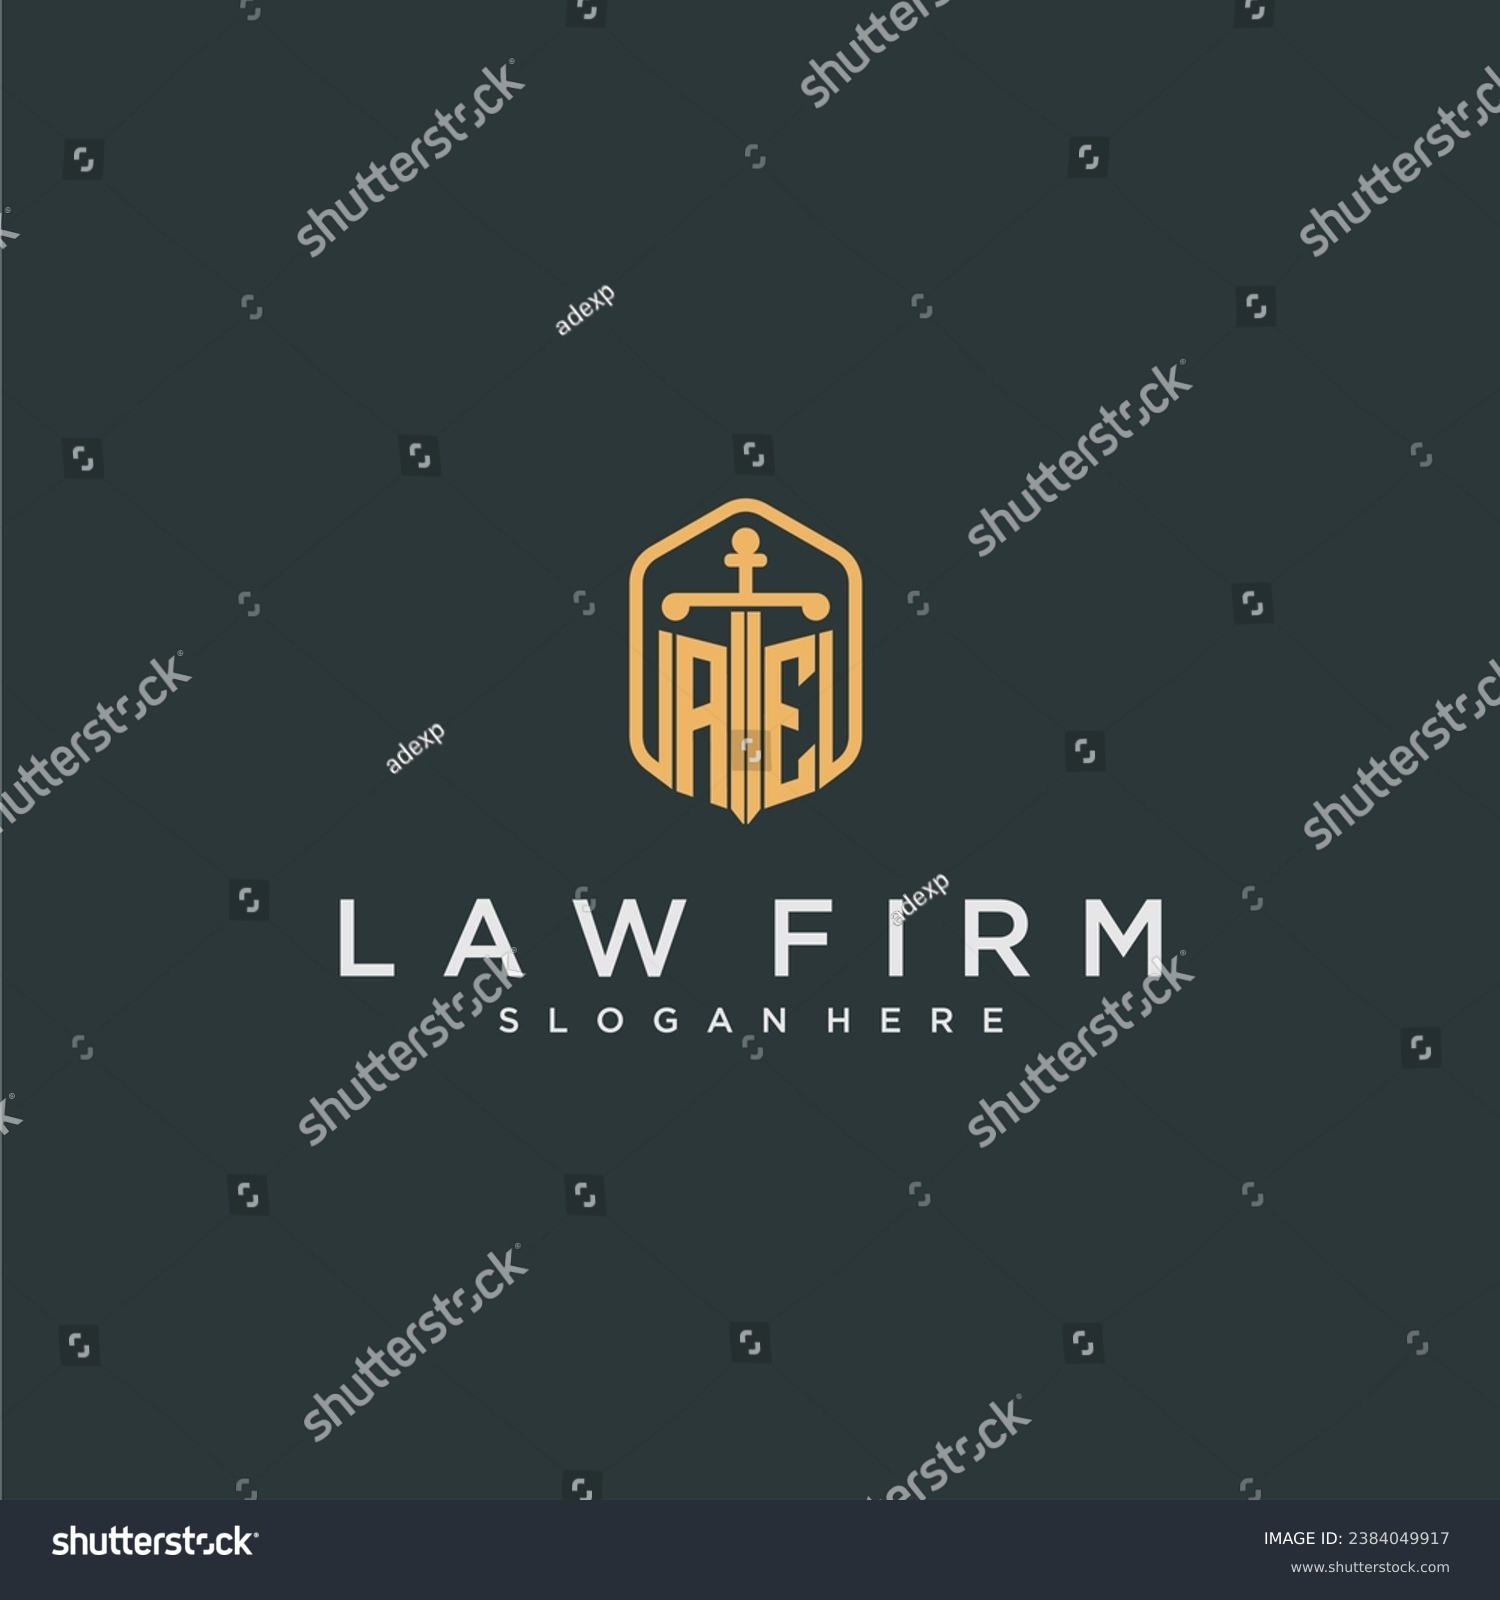 SVG of AE initial logo monogram with shield and sword style design for law firm svg